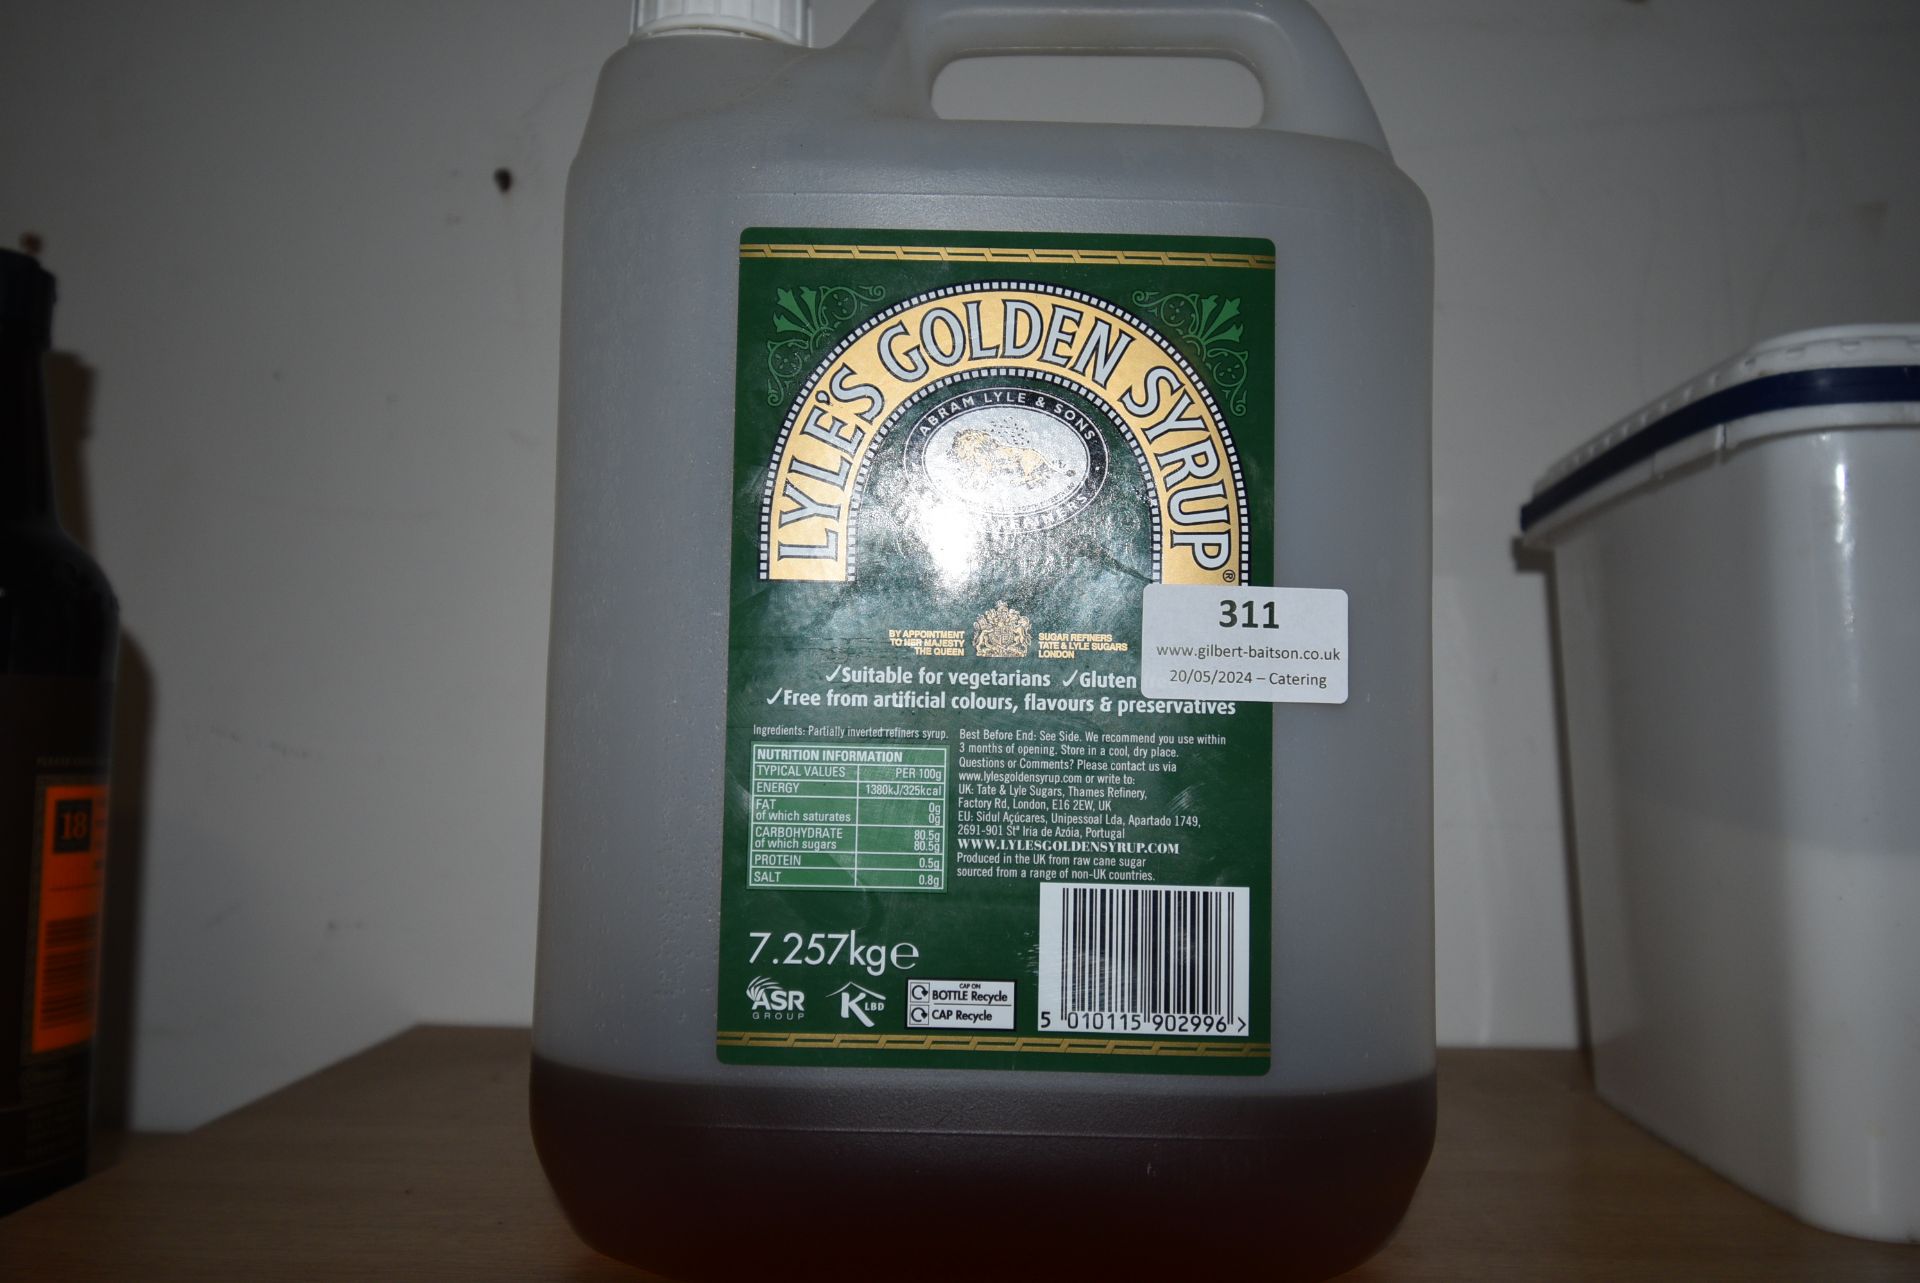 Part Tub of Lyle’s Golden Syrup